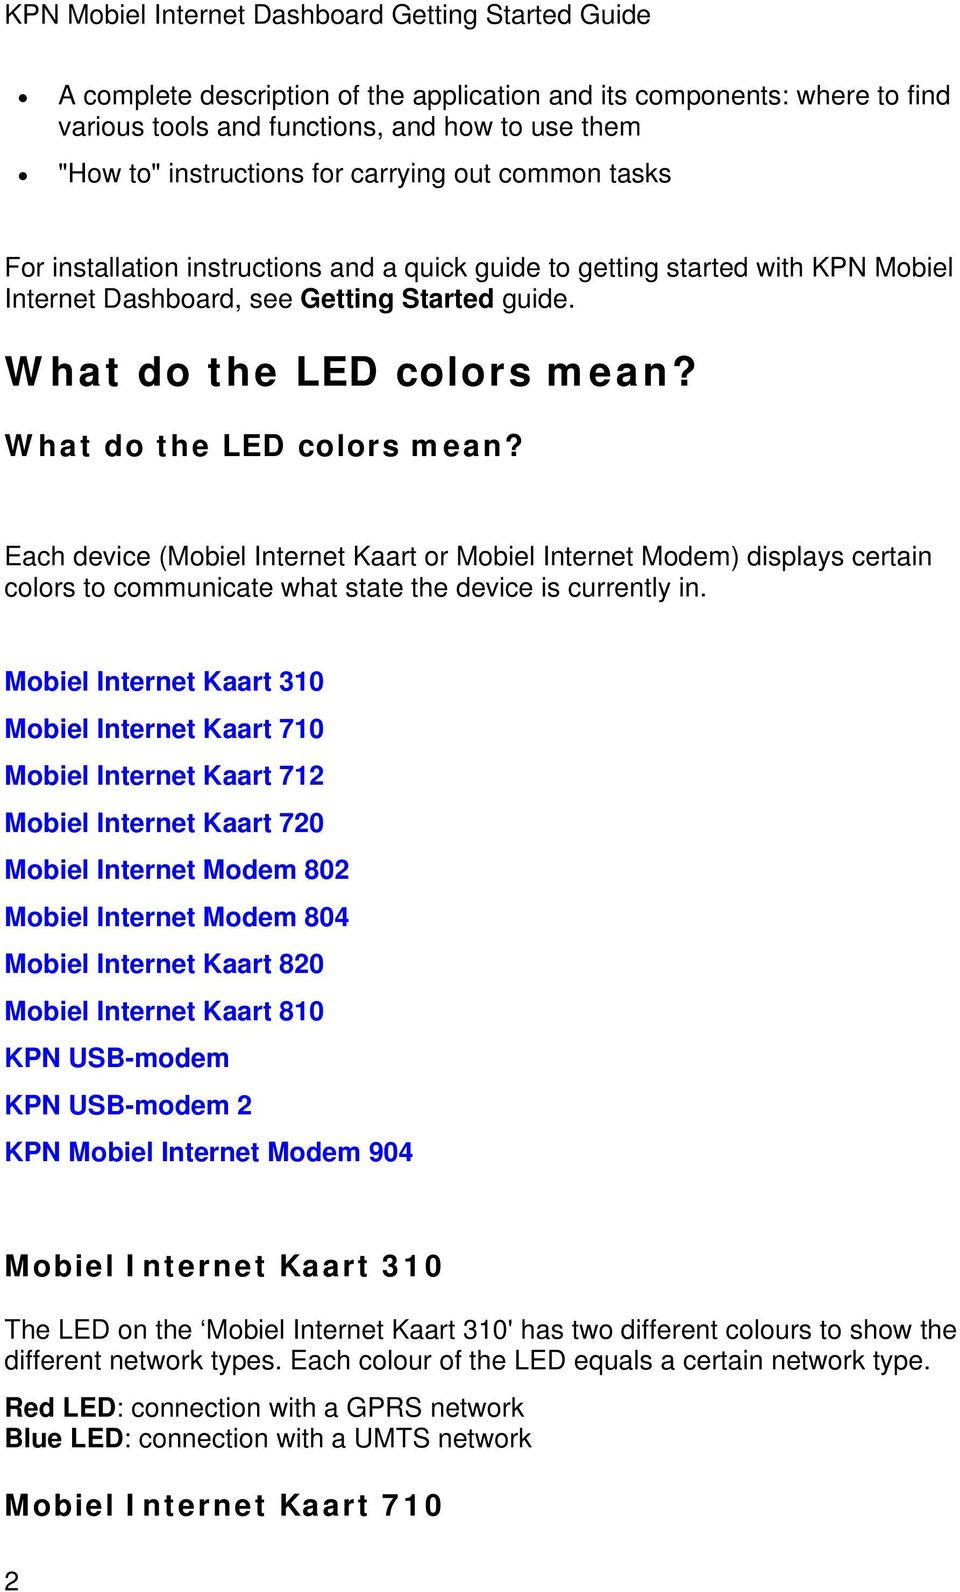 What do the LED colors mean? Each device (Mobiel Internet Kaart or Mobiel Internet Modem) displays certain colors to communicate what state the device is currently in.